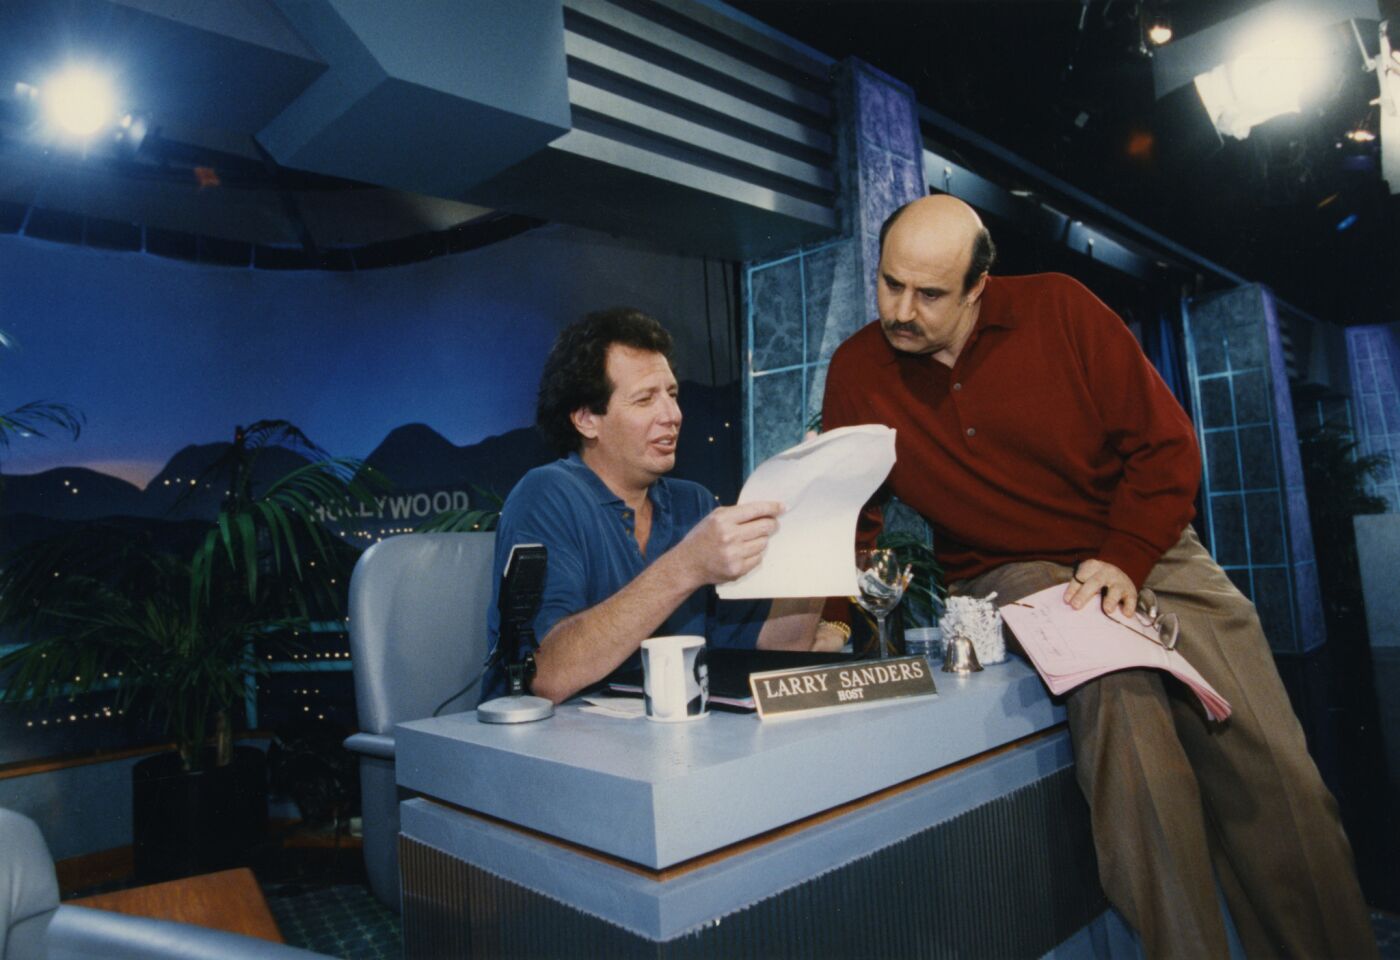 Shandling works with Jeffrey Tambor on the set of "The Larry Sanders Show in August 1992.